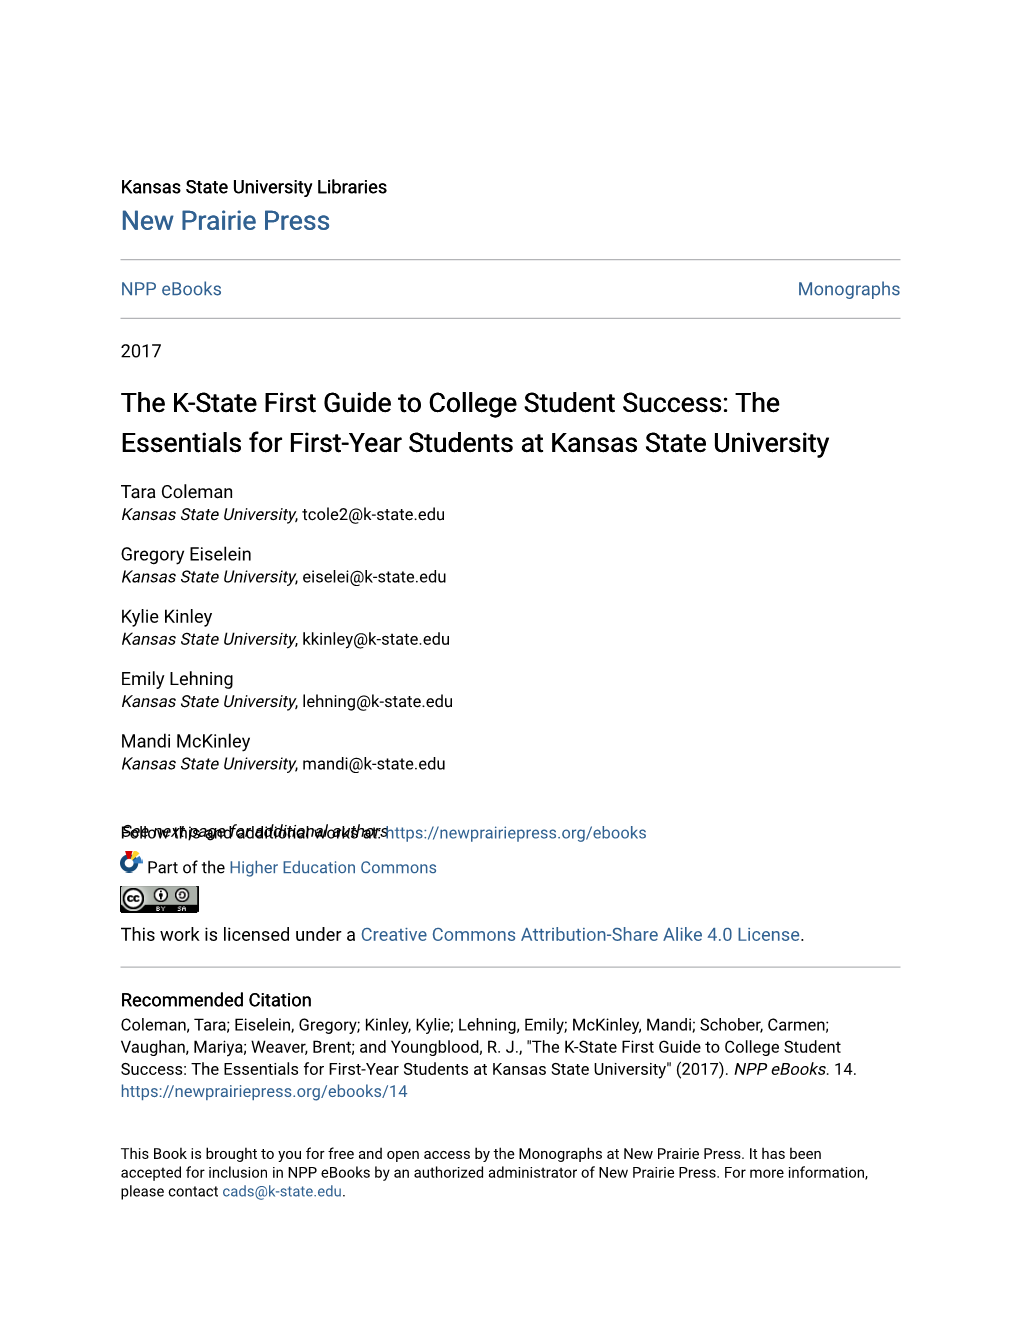 The K-State First Guide to College Student Success: the Essentials for First-Year Students at Kansas State University